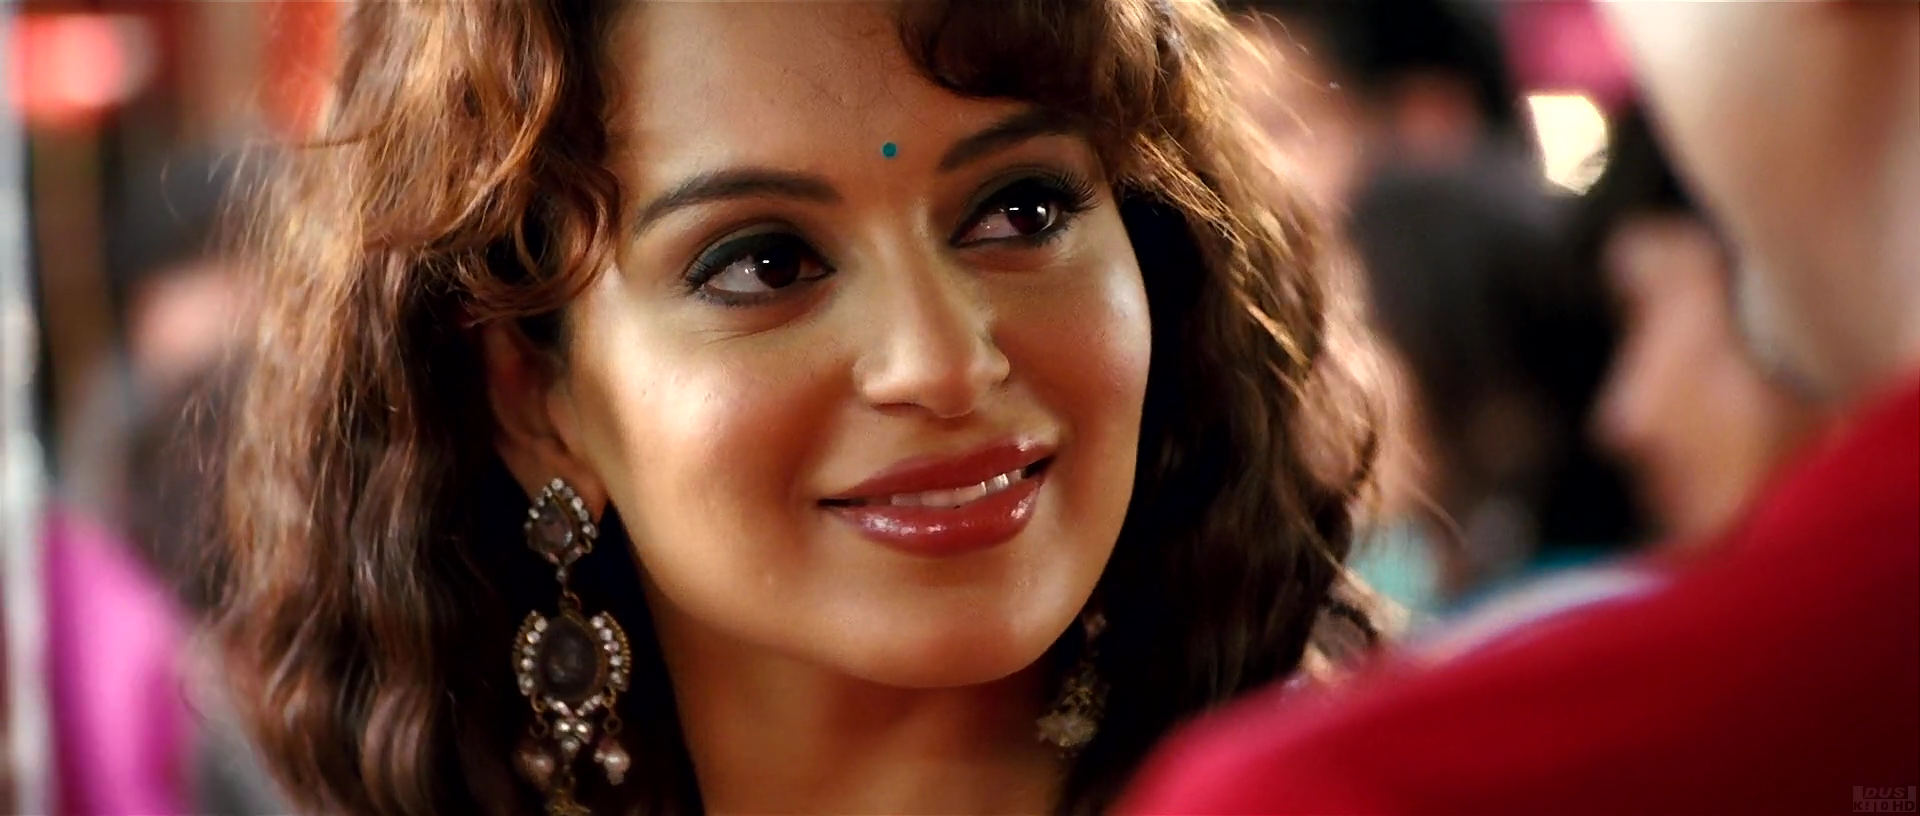 ( Tanu Weds Manu 2011 (All Video Songs) Blu Ray Rip 1080p DTS HD-MA DUS preview 9